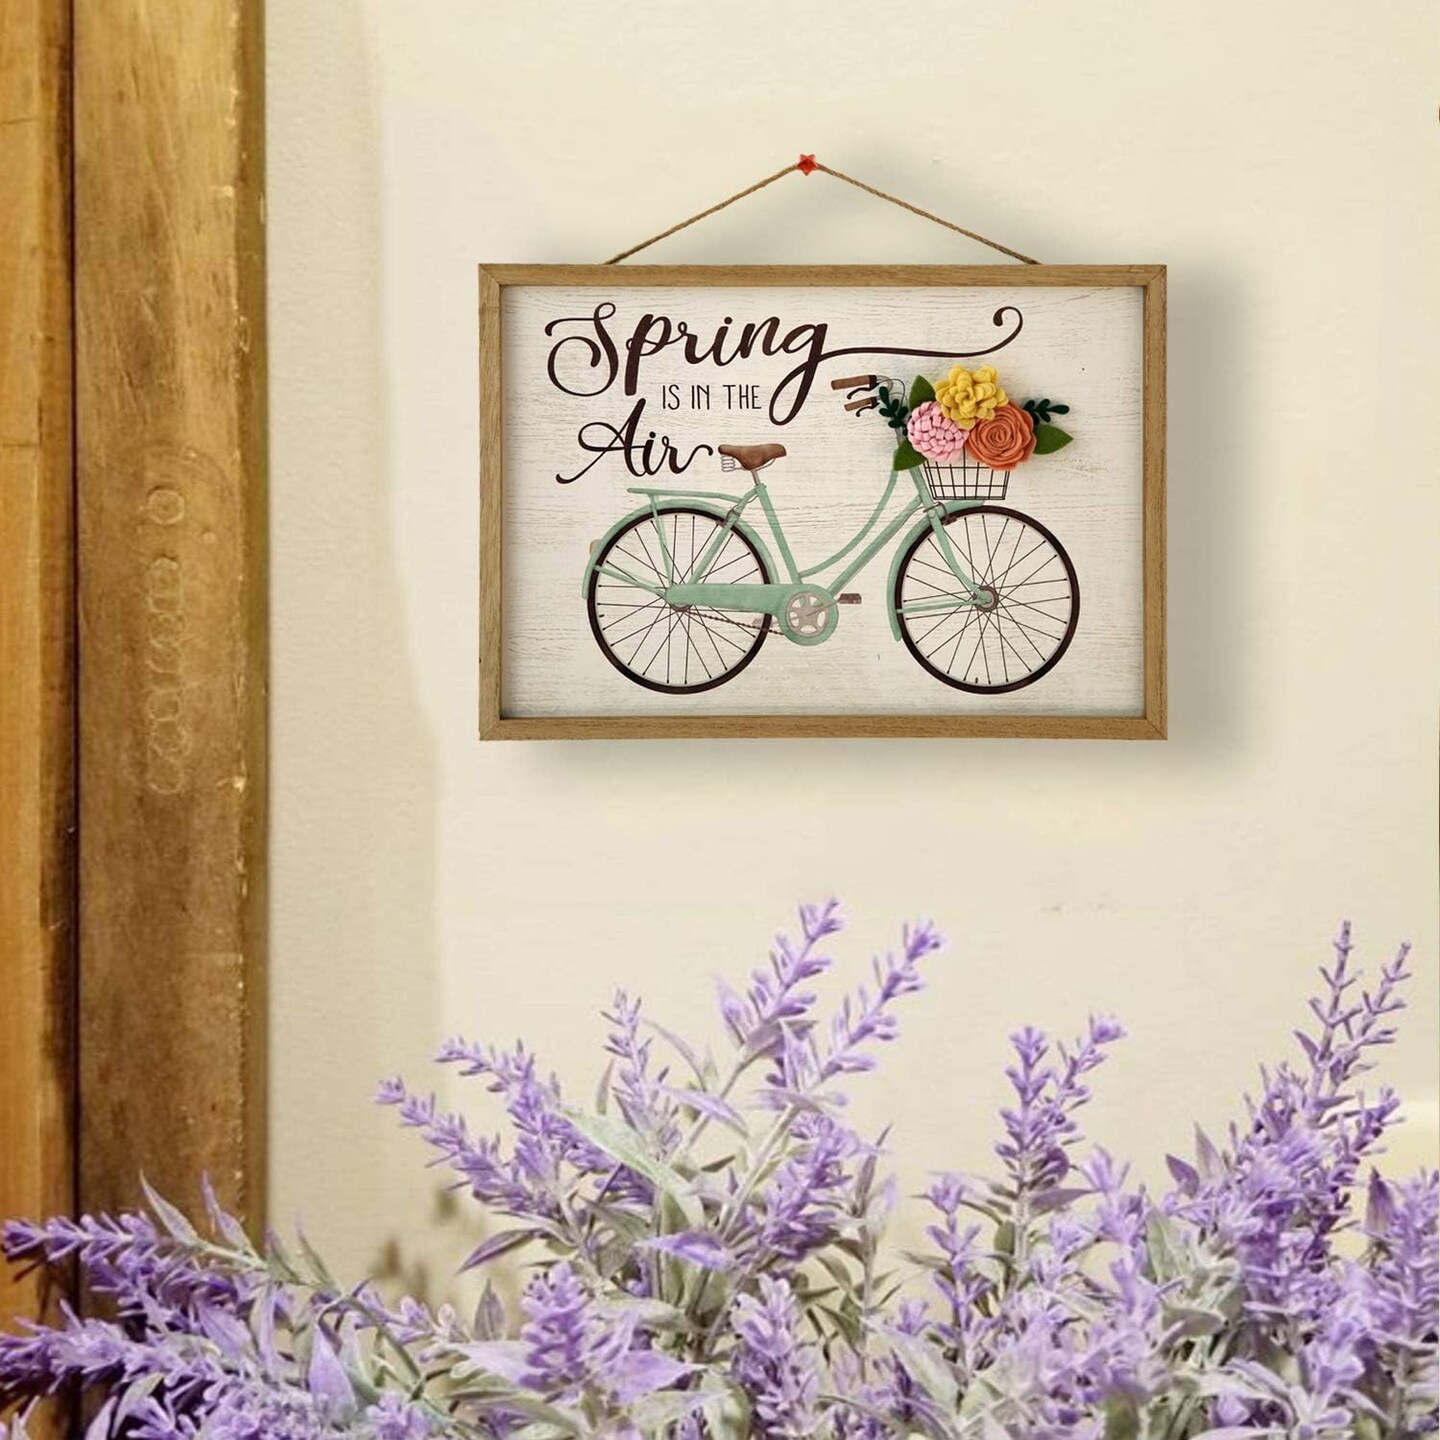 Spring Blooms 3D Flower Wall Decor